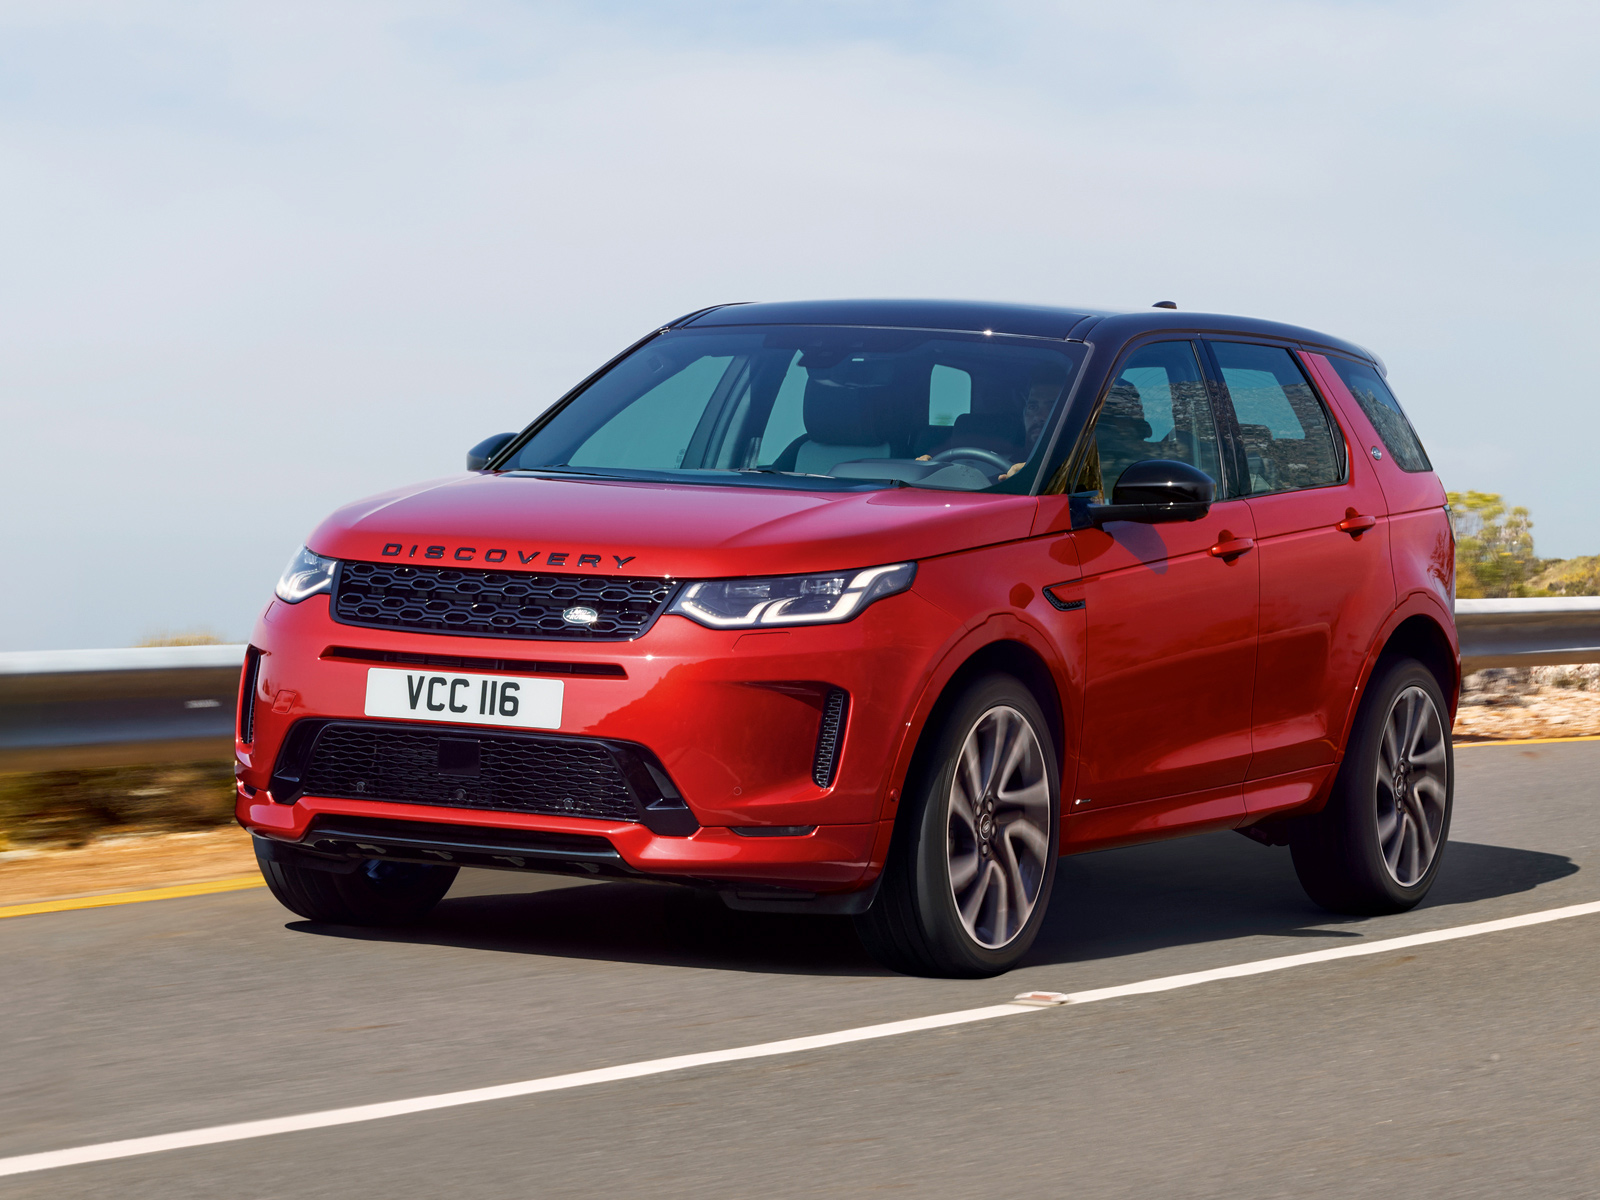 Land-Rover-Discovery-Sport